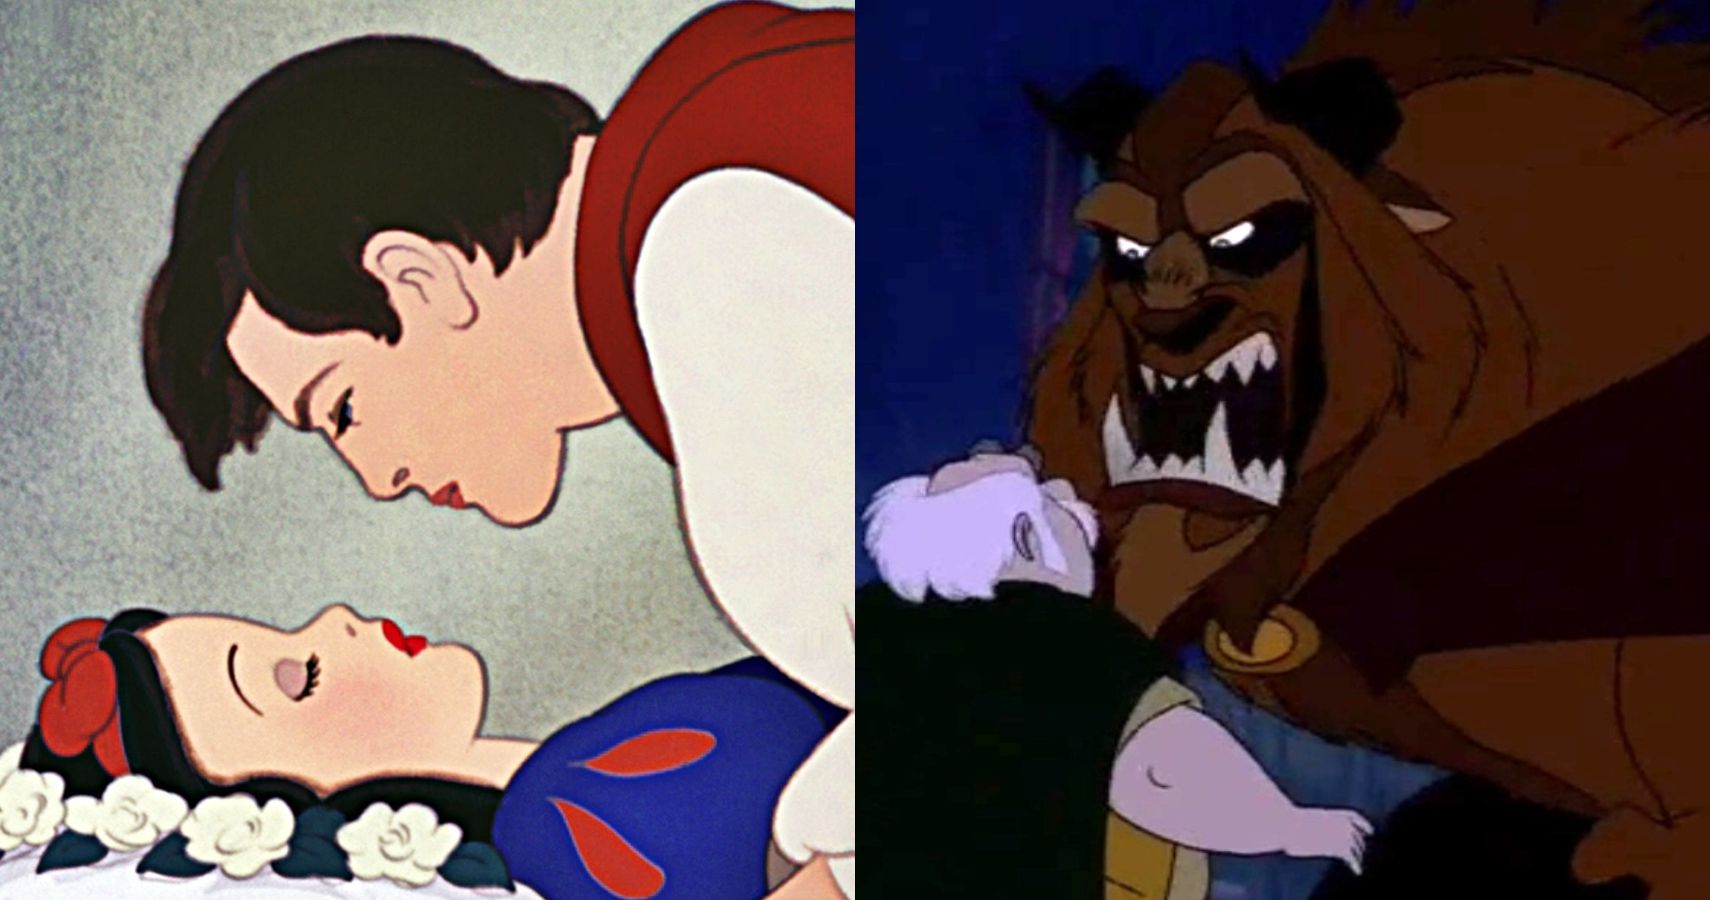 10 Most Despicable Acts Committed By A Disney Prince, Ranked